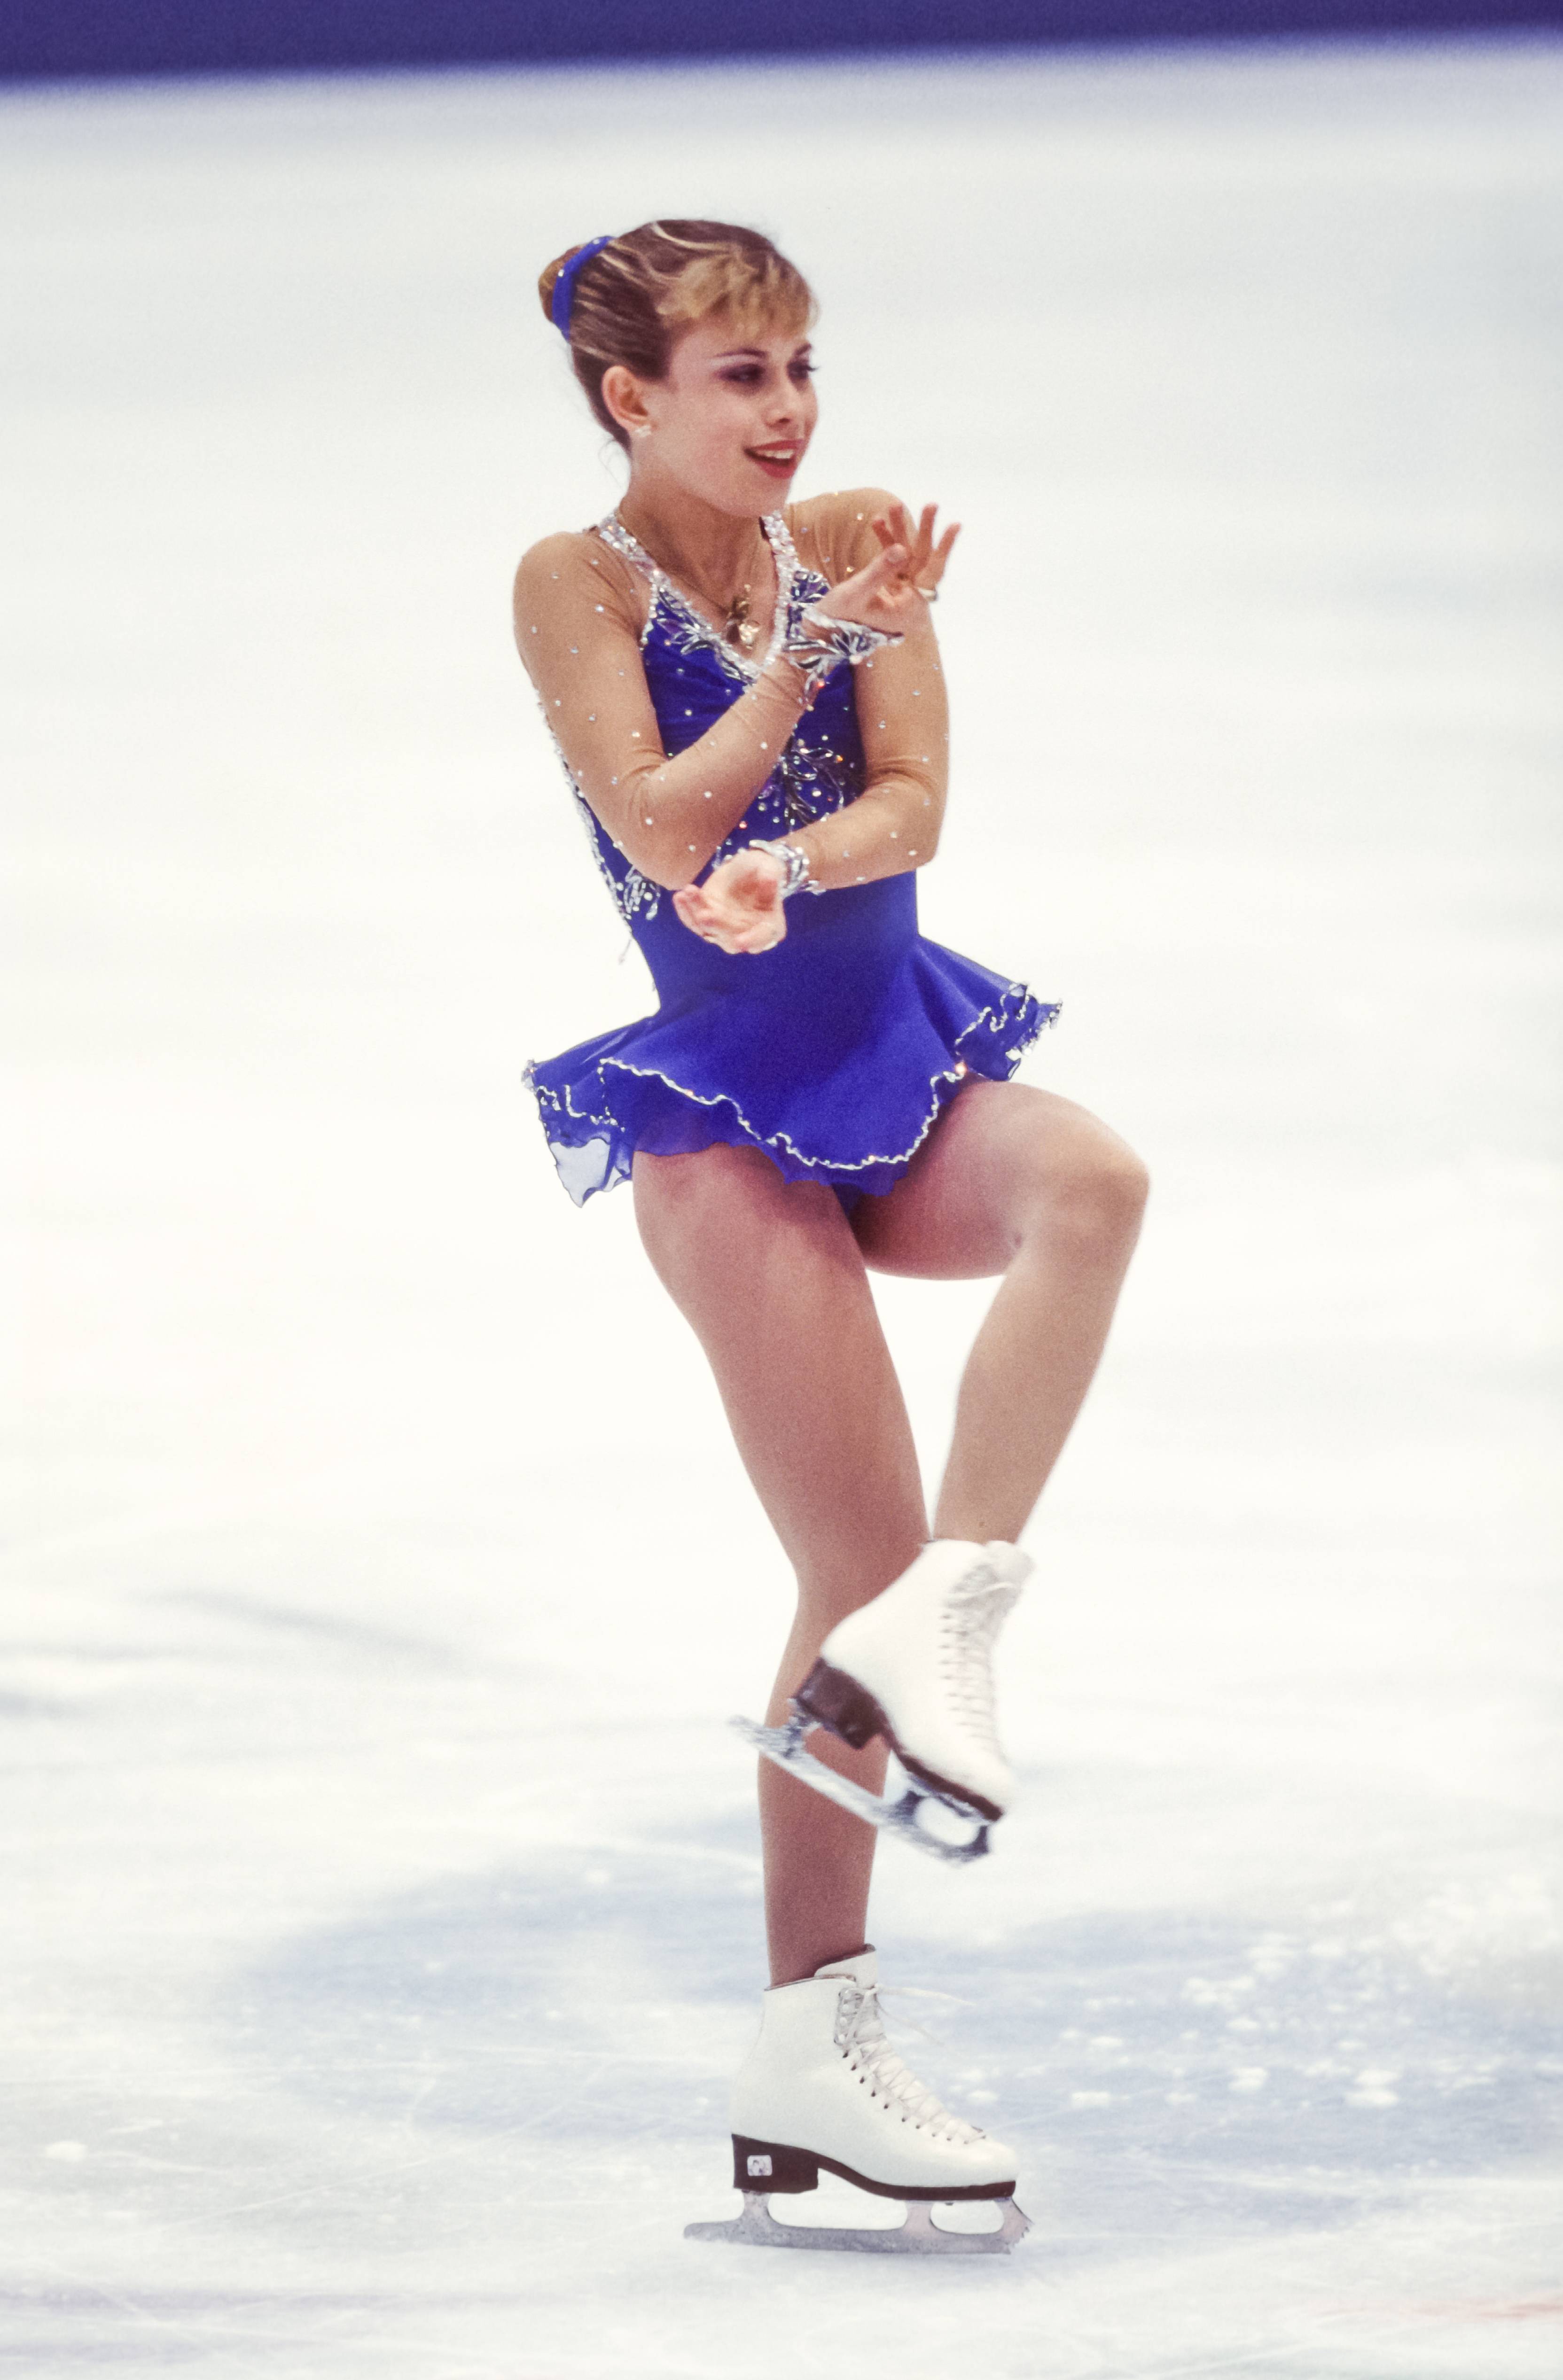 Tara Lipinski, representing the US, competes in the Ladies Singles figure skating Free Skate event at the Winter Olympics on February 20, 1998, in Nagano, Japan | Source: Getty Images